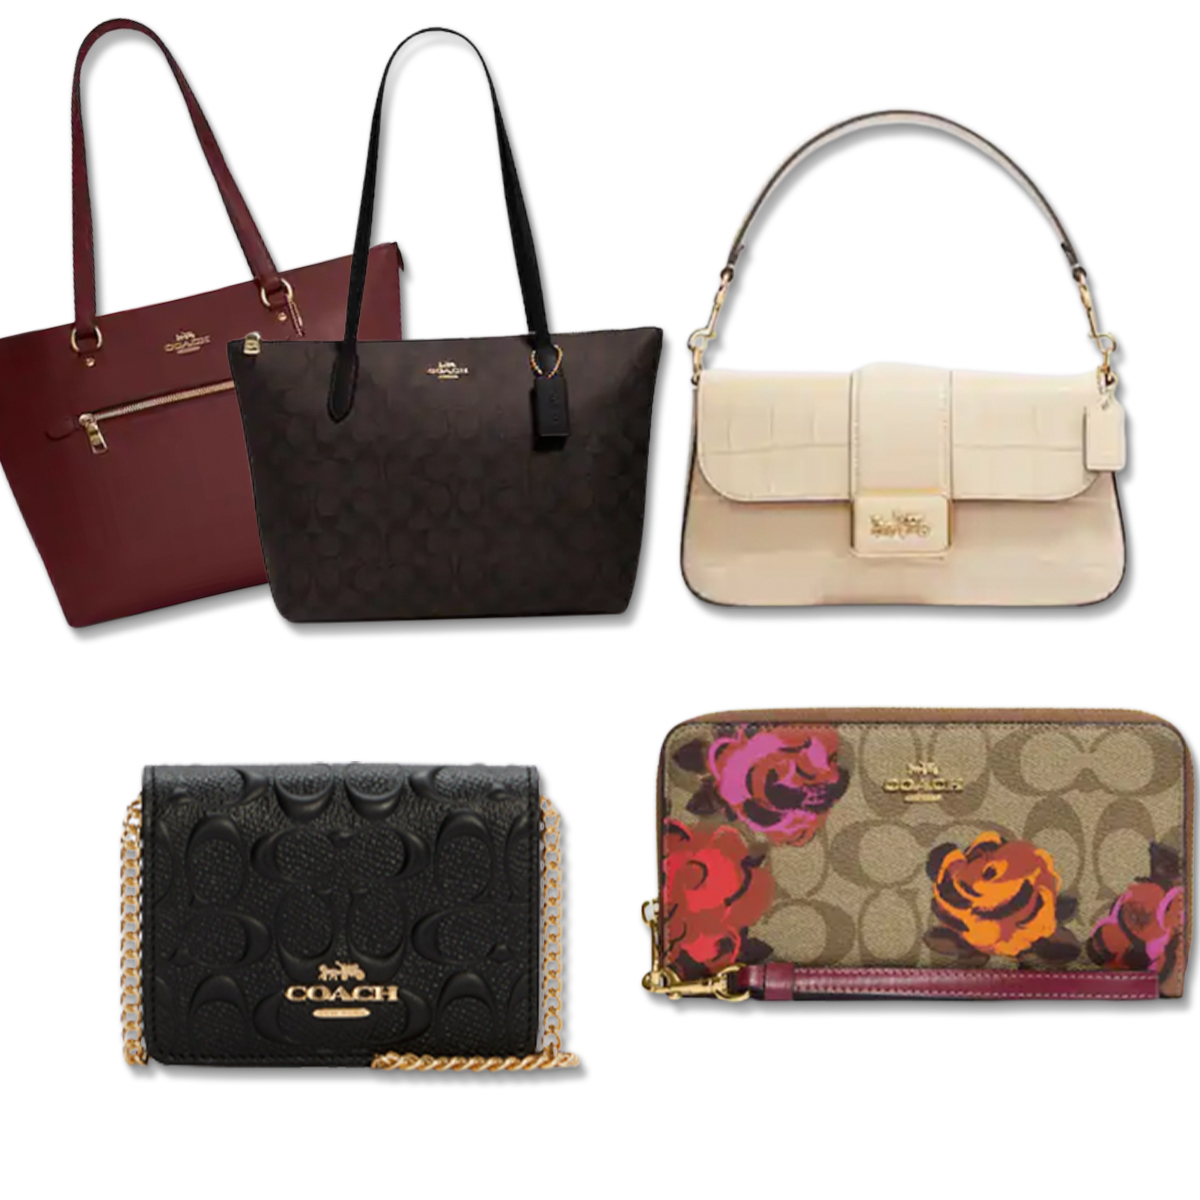 The Coach Outlet Handbags Sale Ends Soon: Here's What to Buy